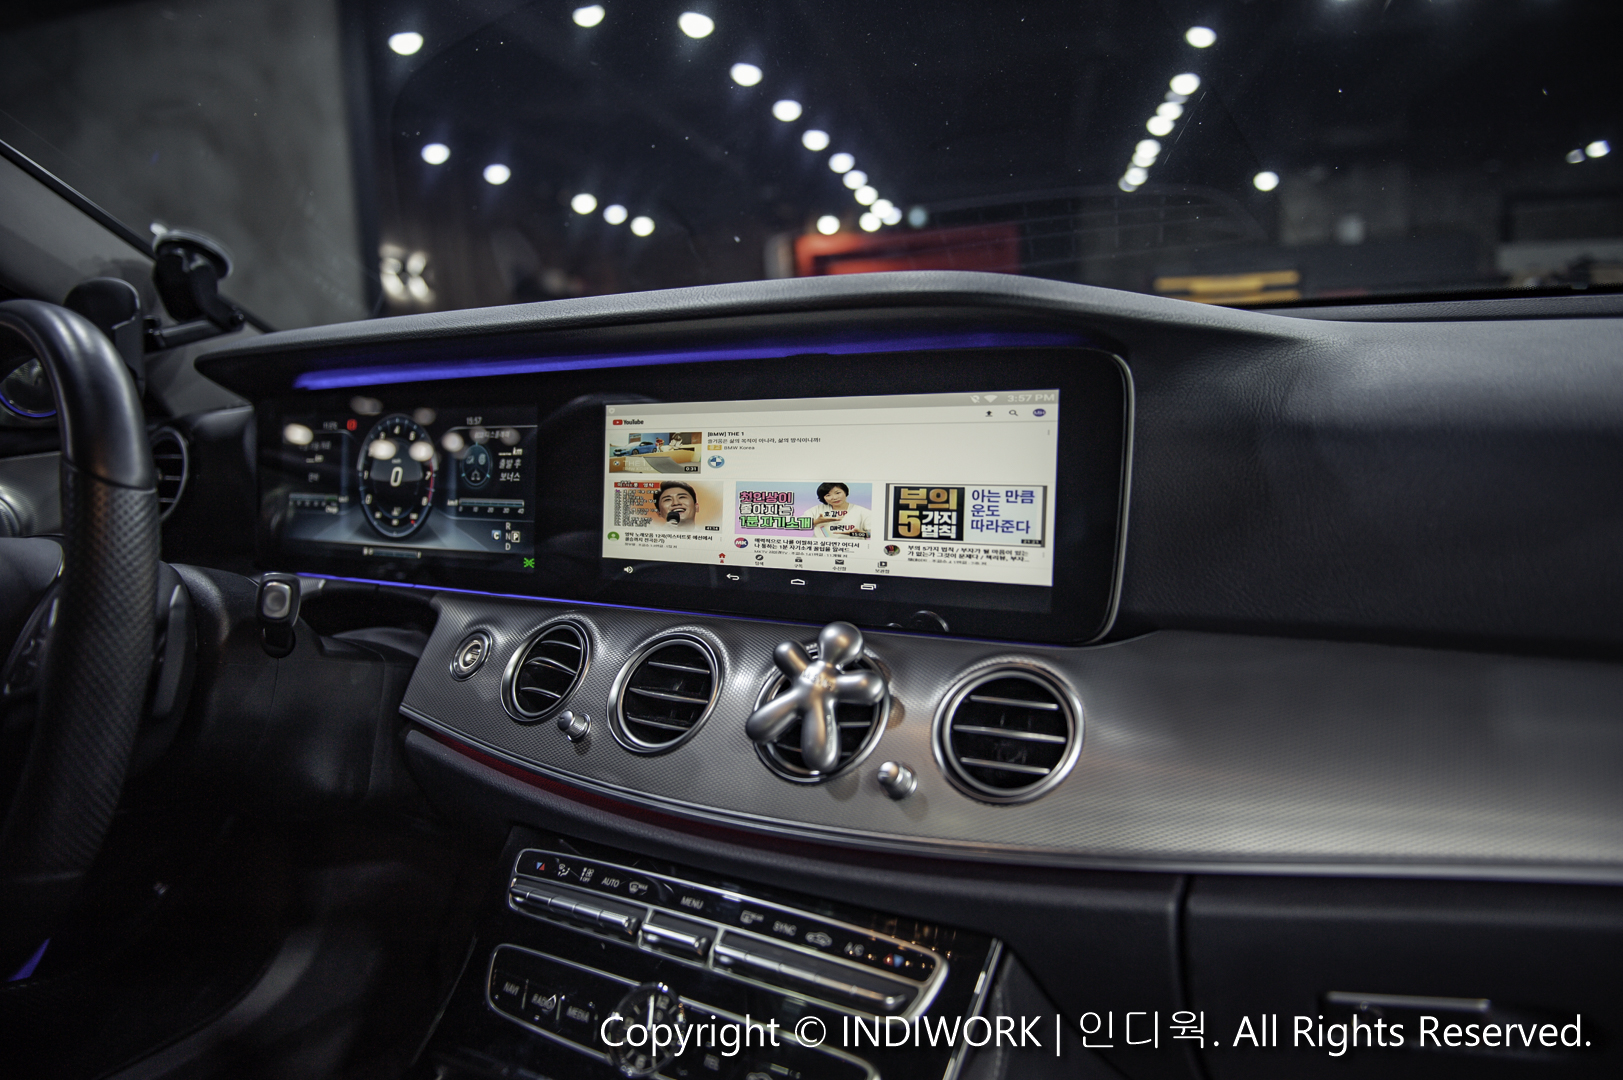 Android CarPC for 2016 Mercedes W213 E-Class "M2C-200"